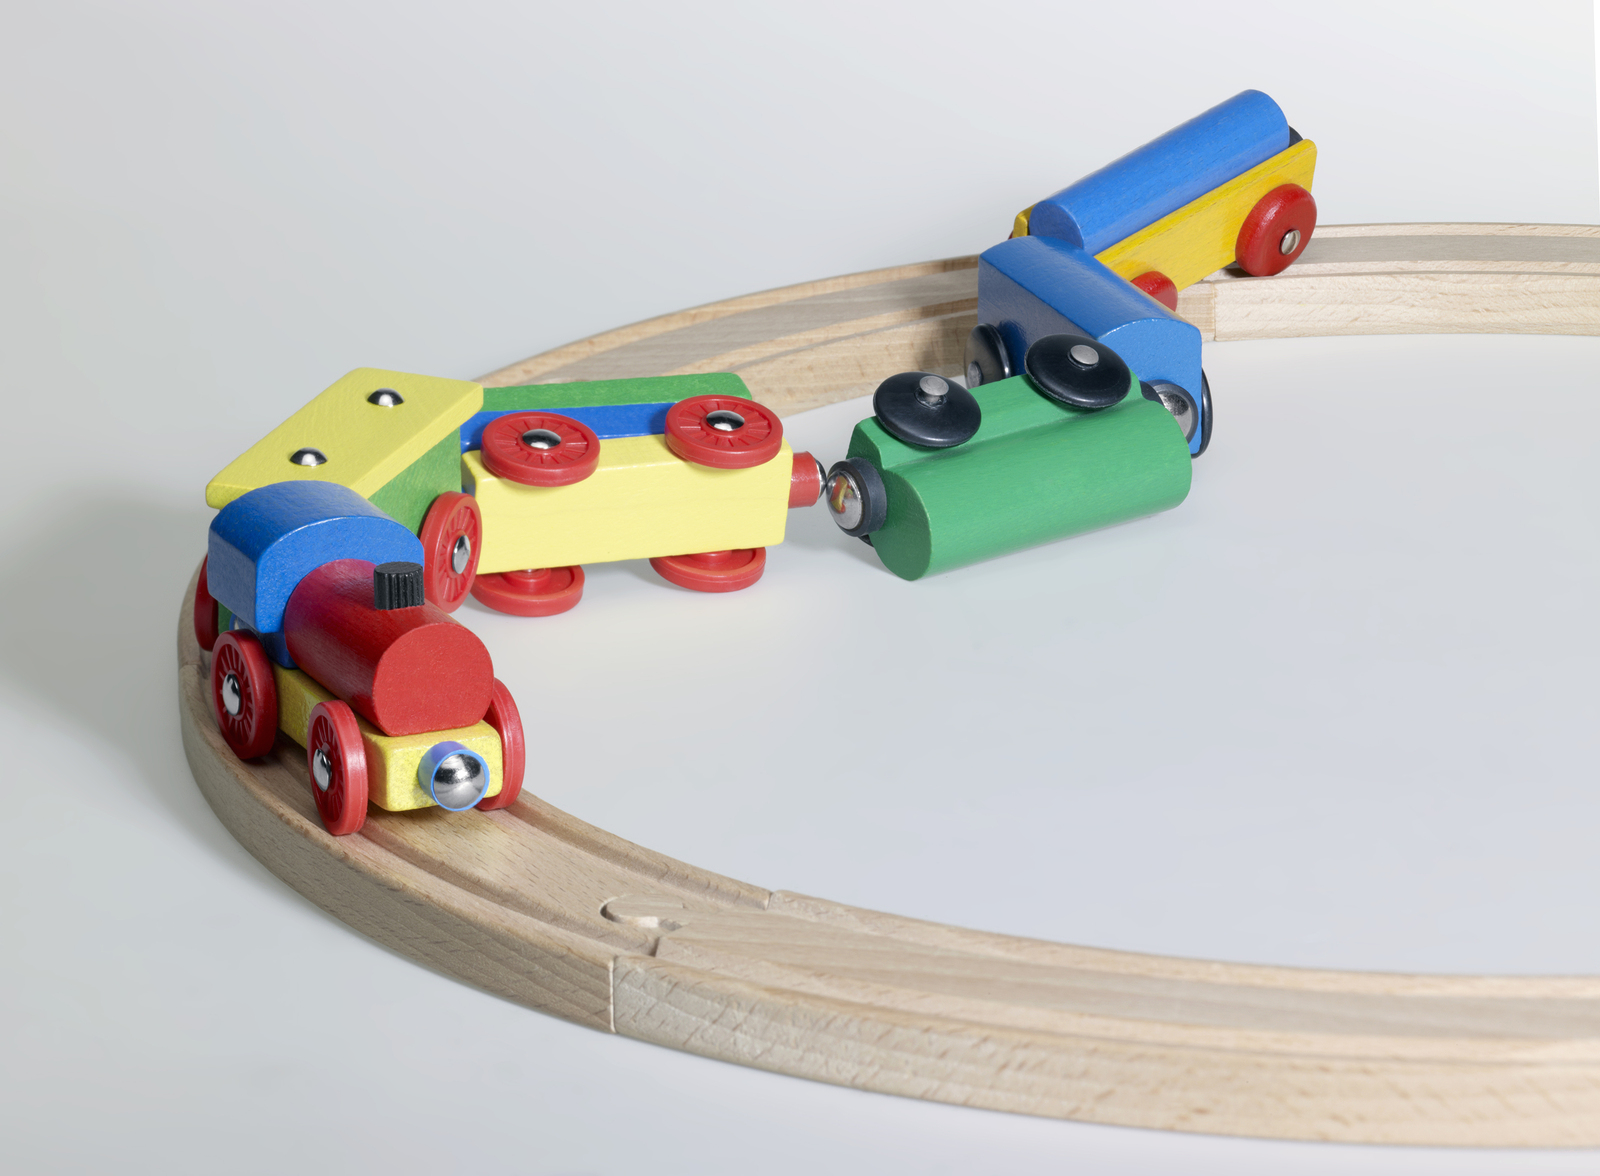 accident of a wooden toy train